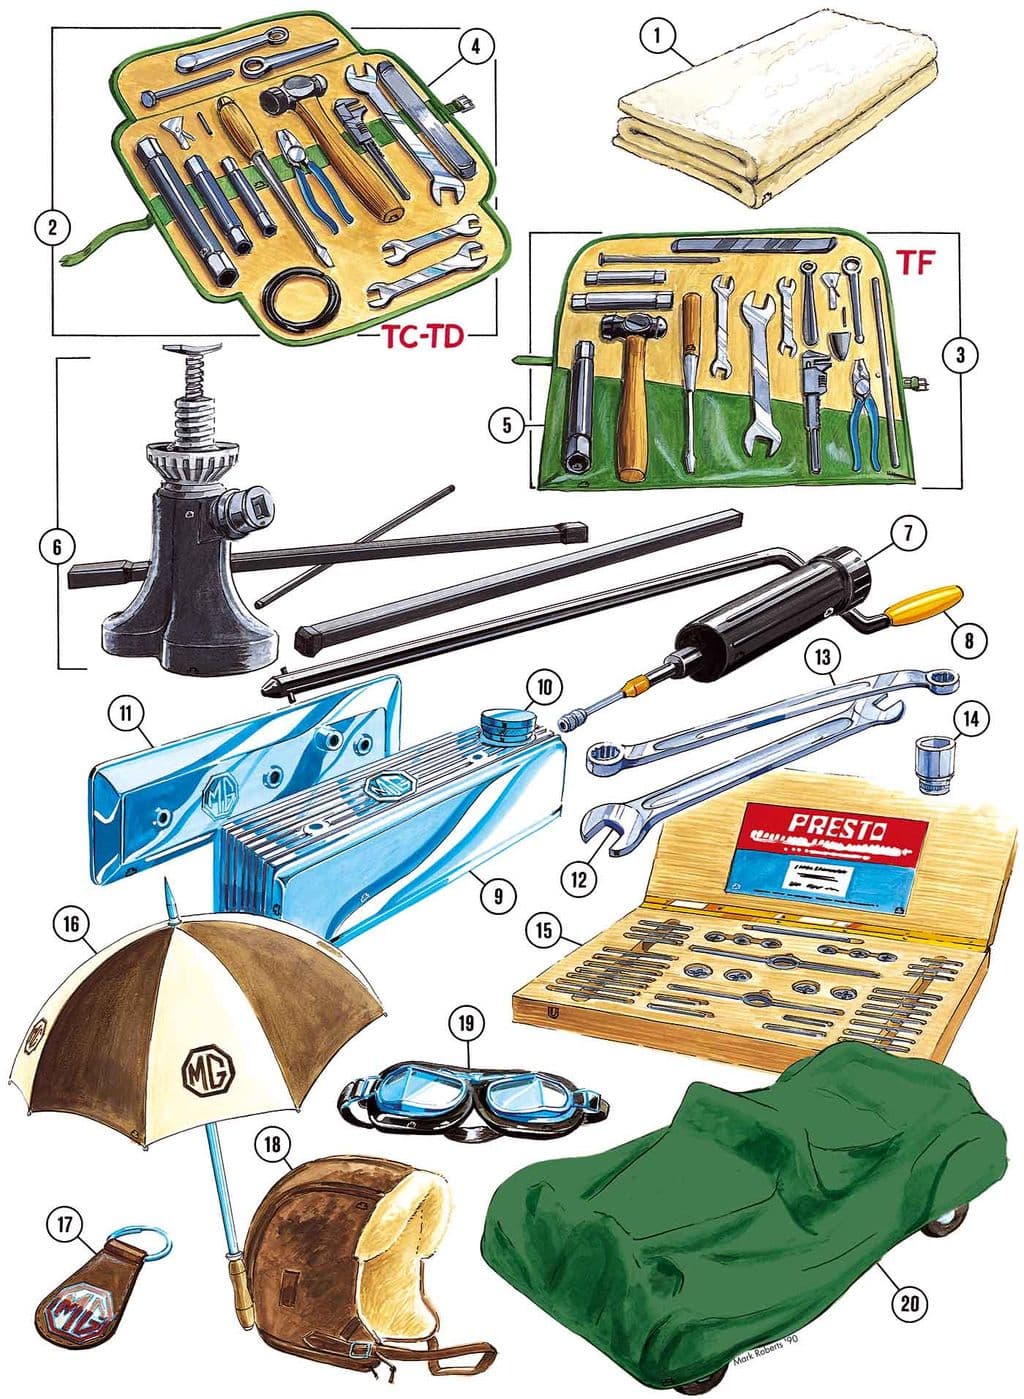 MGTD-TF 1949-1955 - Emergency | Webshop Anglo Parts - Tool kit & accessories - 1